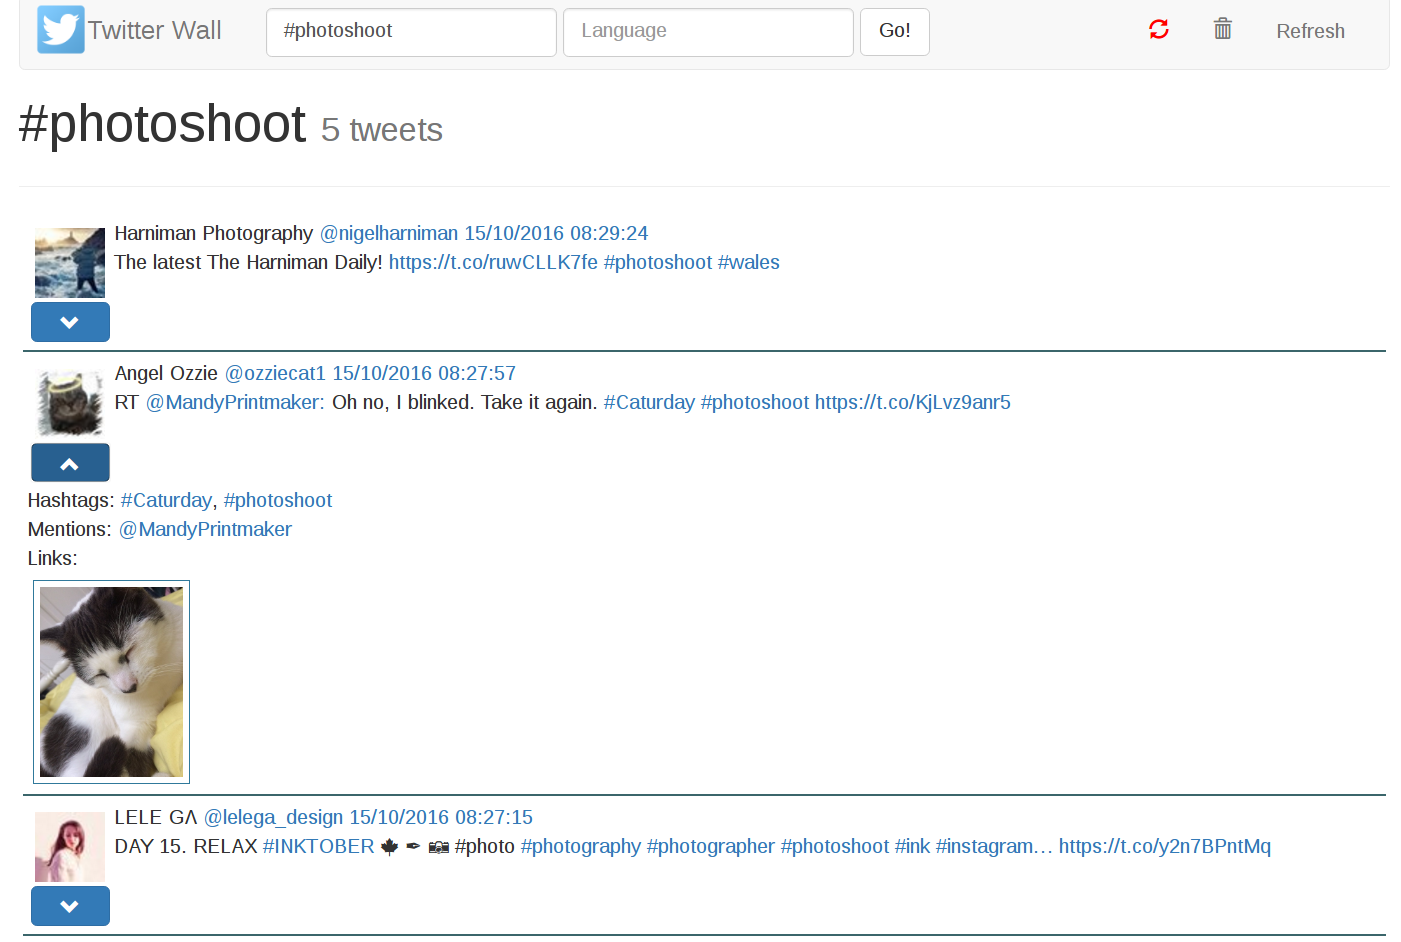 Tweets list with “#photoshoot” query with one tweet details shown